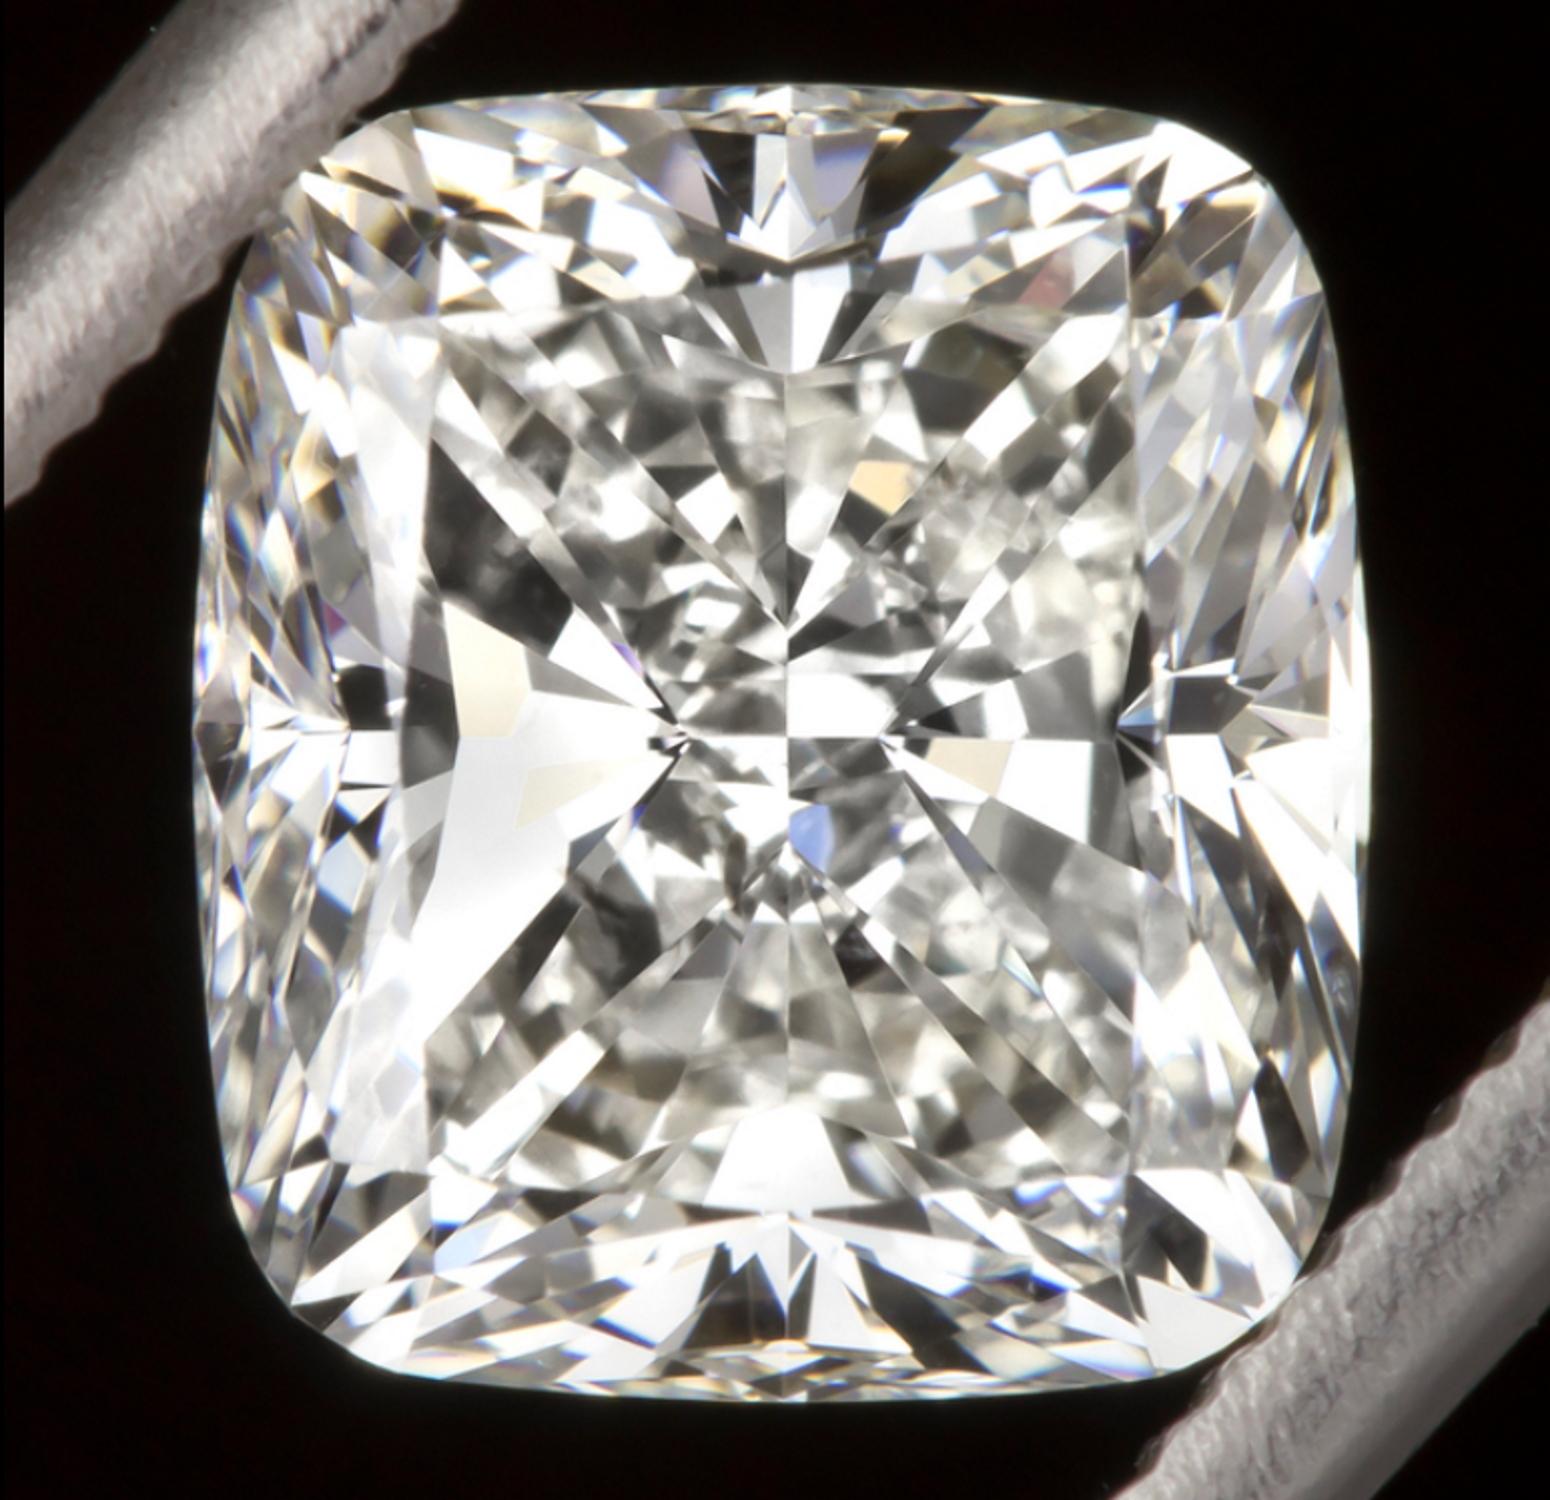 This excellent quality 10 carat diamond is certified by GIA, The world's most respected lab. The diamond is graded H for color, and it faces up beautifully white with no yellow. There are no brown, green or milky shades and no cloudiness. The